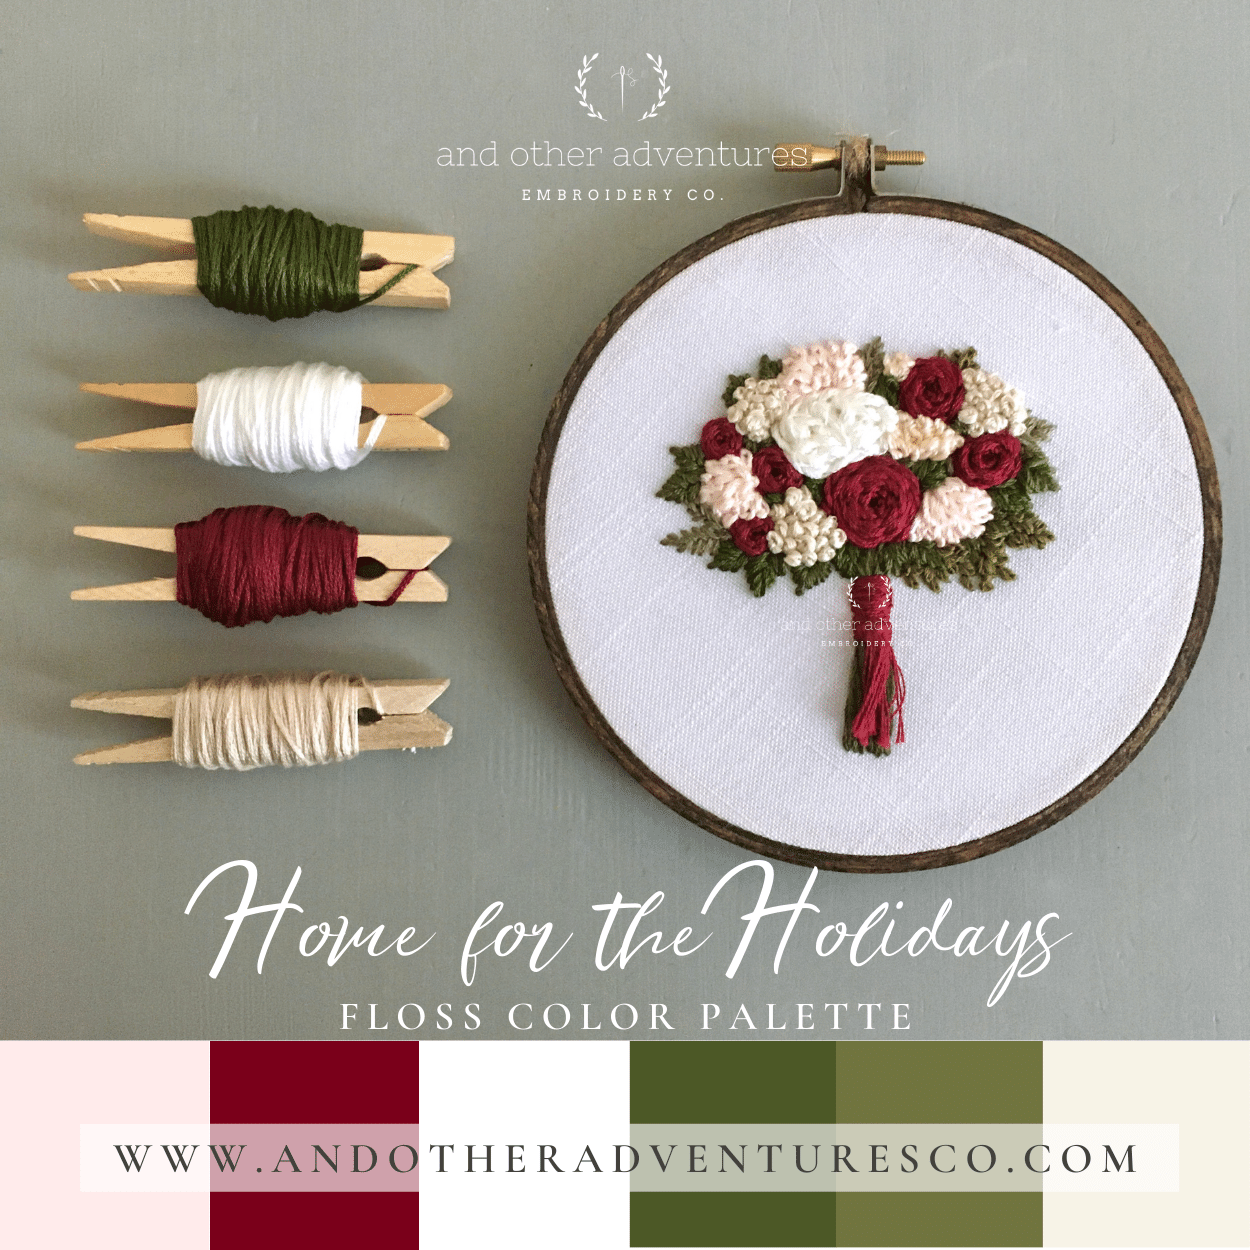 Home for the Holidays Hand Embroidery Floss Color Palette by And Other Adventures Embroidery Co